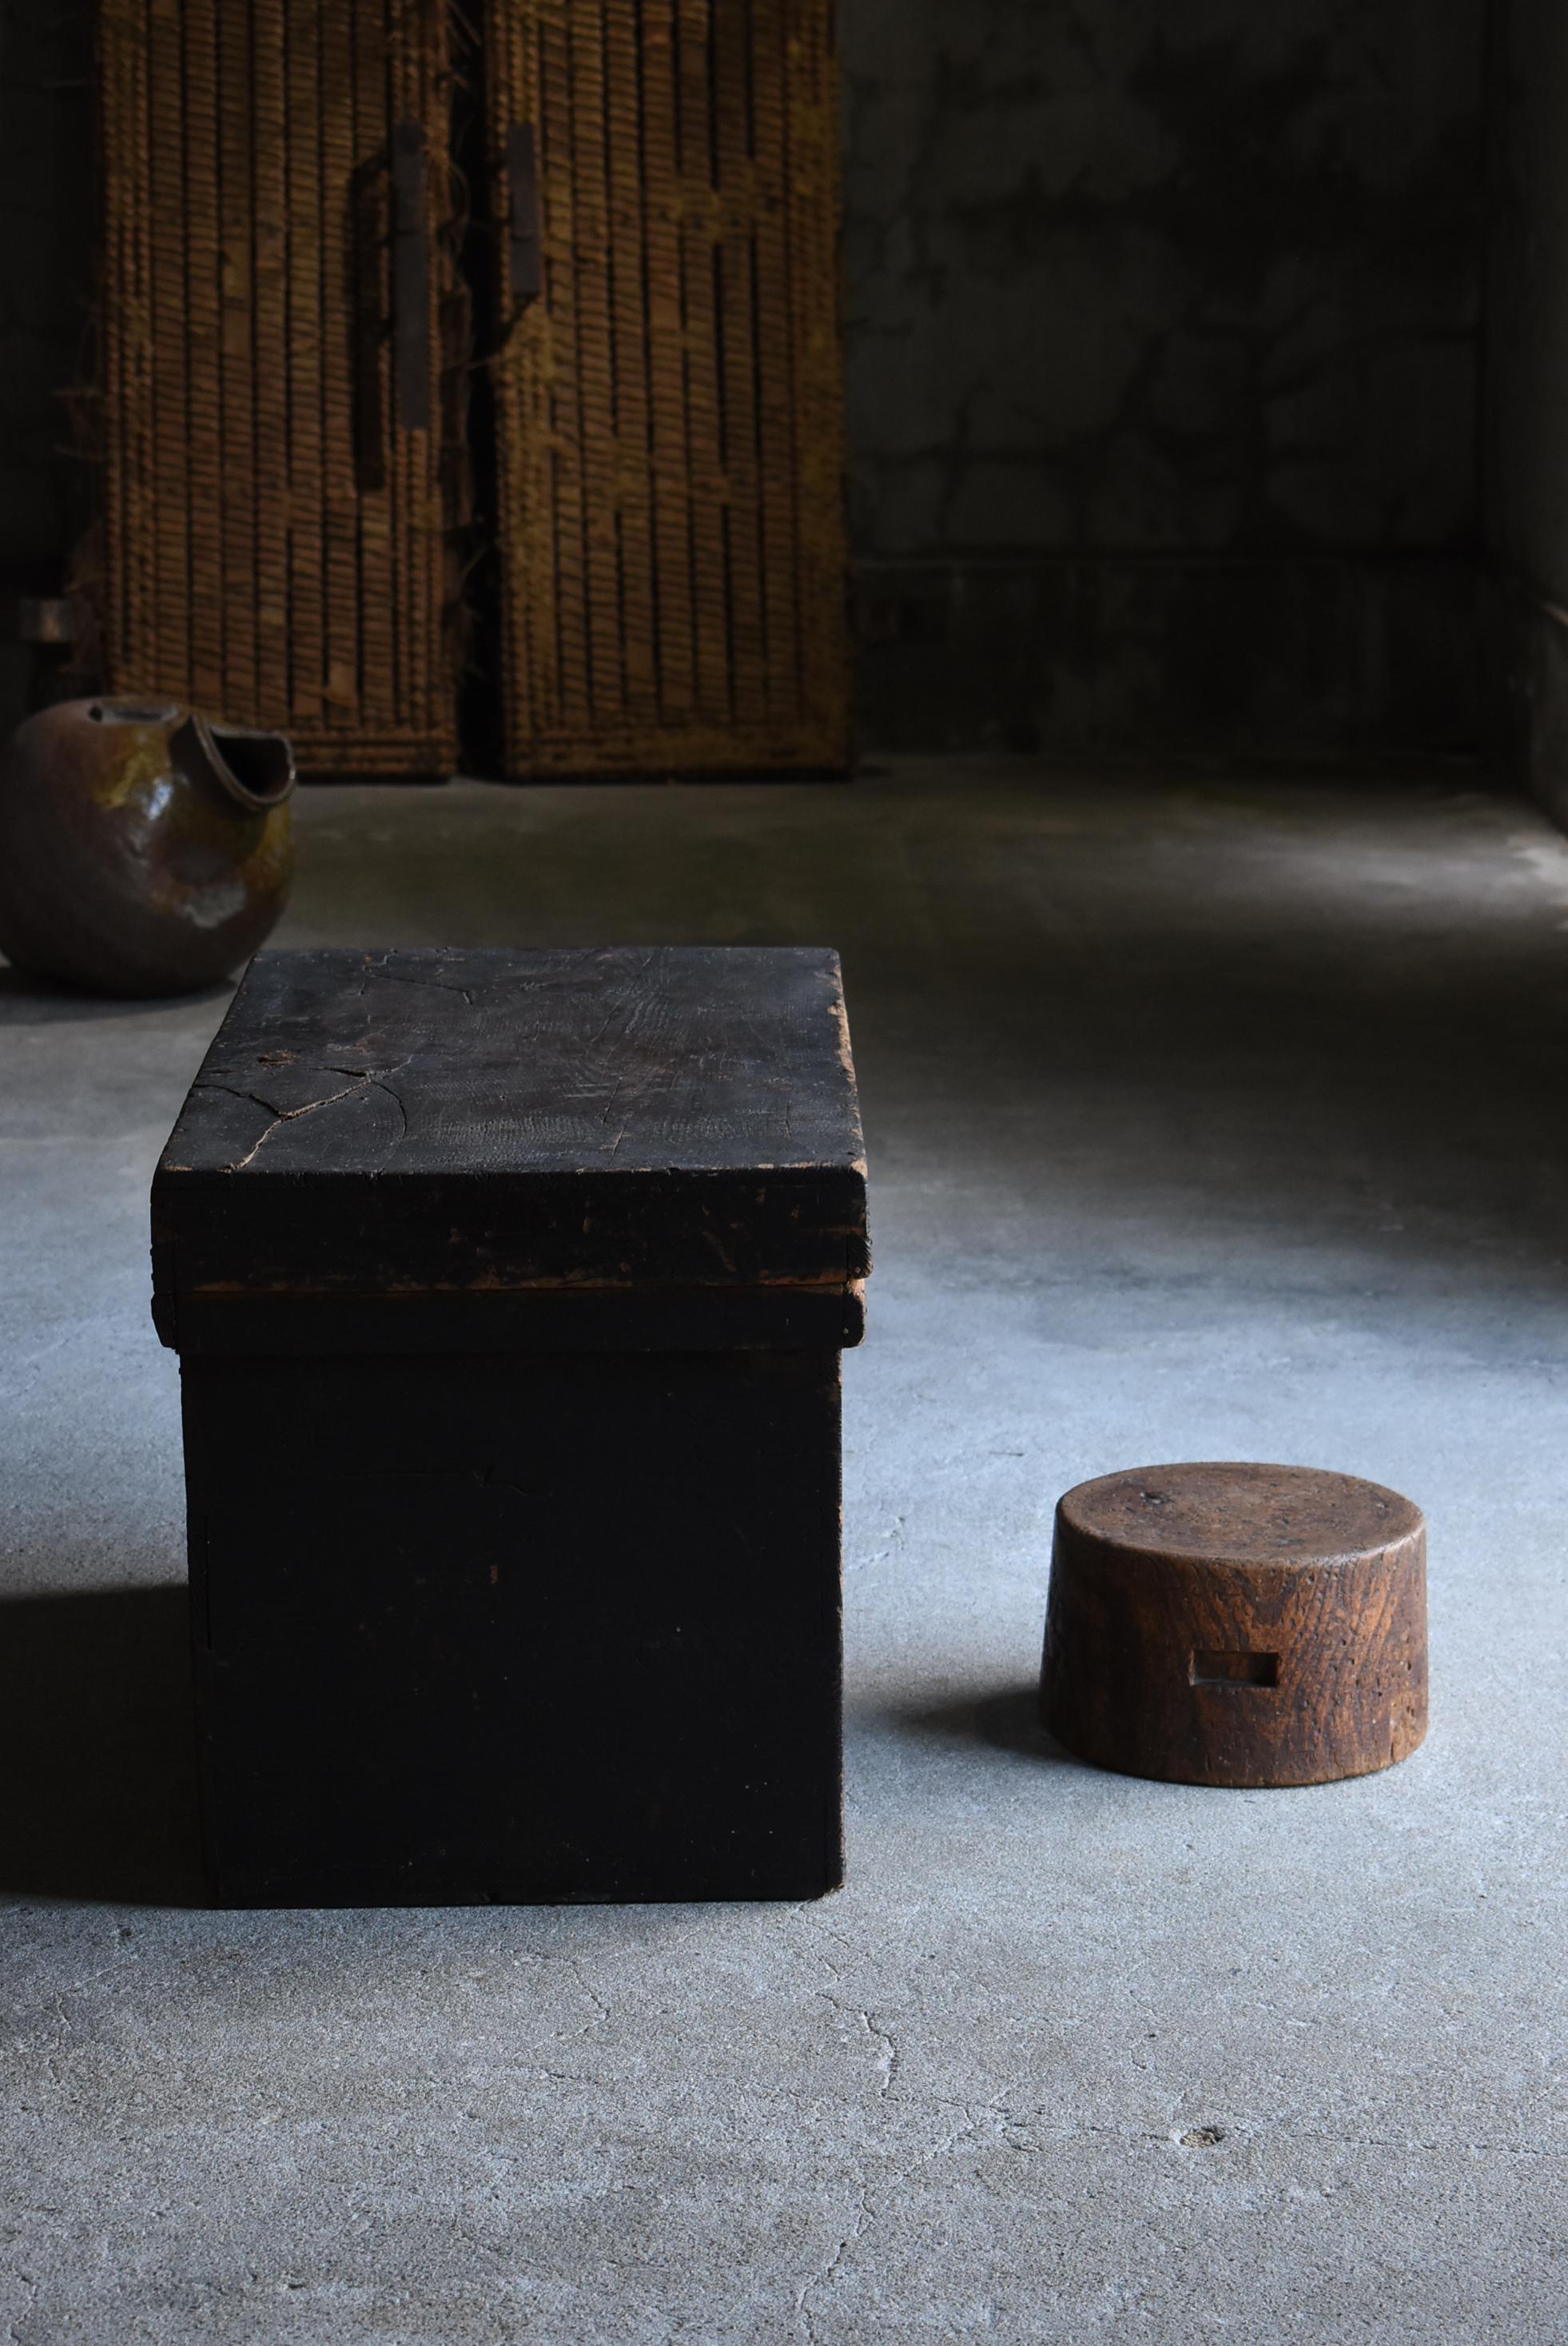 This is a very old Japanese wooden block stool.
It is from the Meiji period (1860s-1900s).
The material is zelkova.

It is sturdy and stable.

The carved handle makes it easy to move.

It is rustic and tasteful, and evokes the world of 